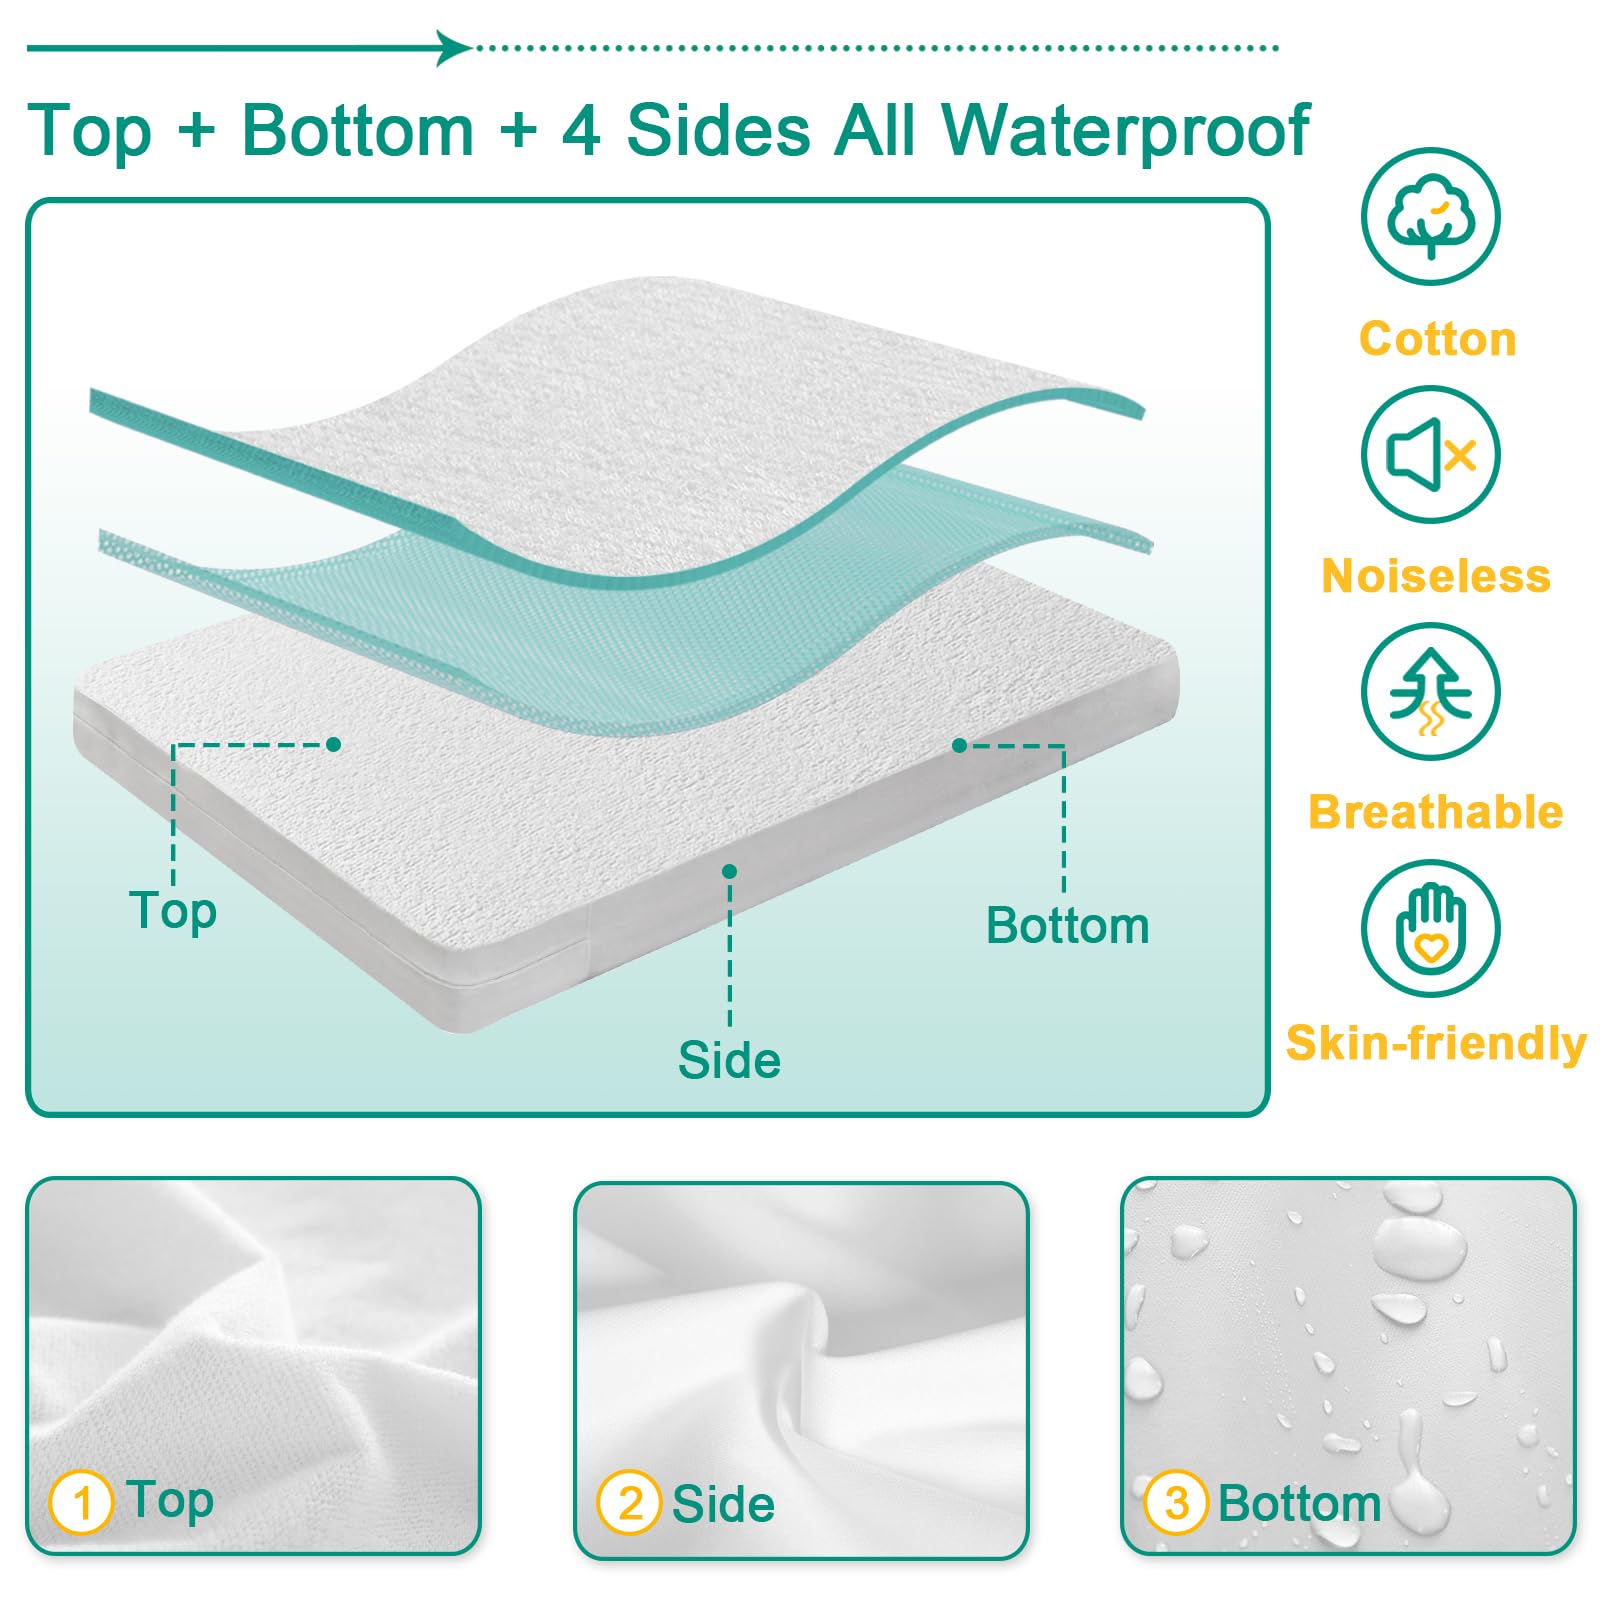 Bedecor Queen Mattress Protector Zippered for 7"-9" Mattress,Soft Cotton Terry 6-Sided Waterproof Mattress Encasement Cover Breathable Noiseless Washable